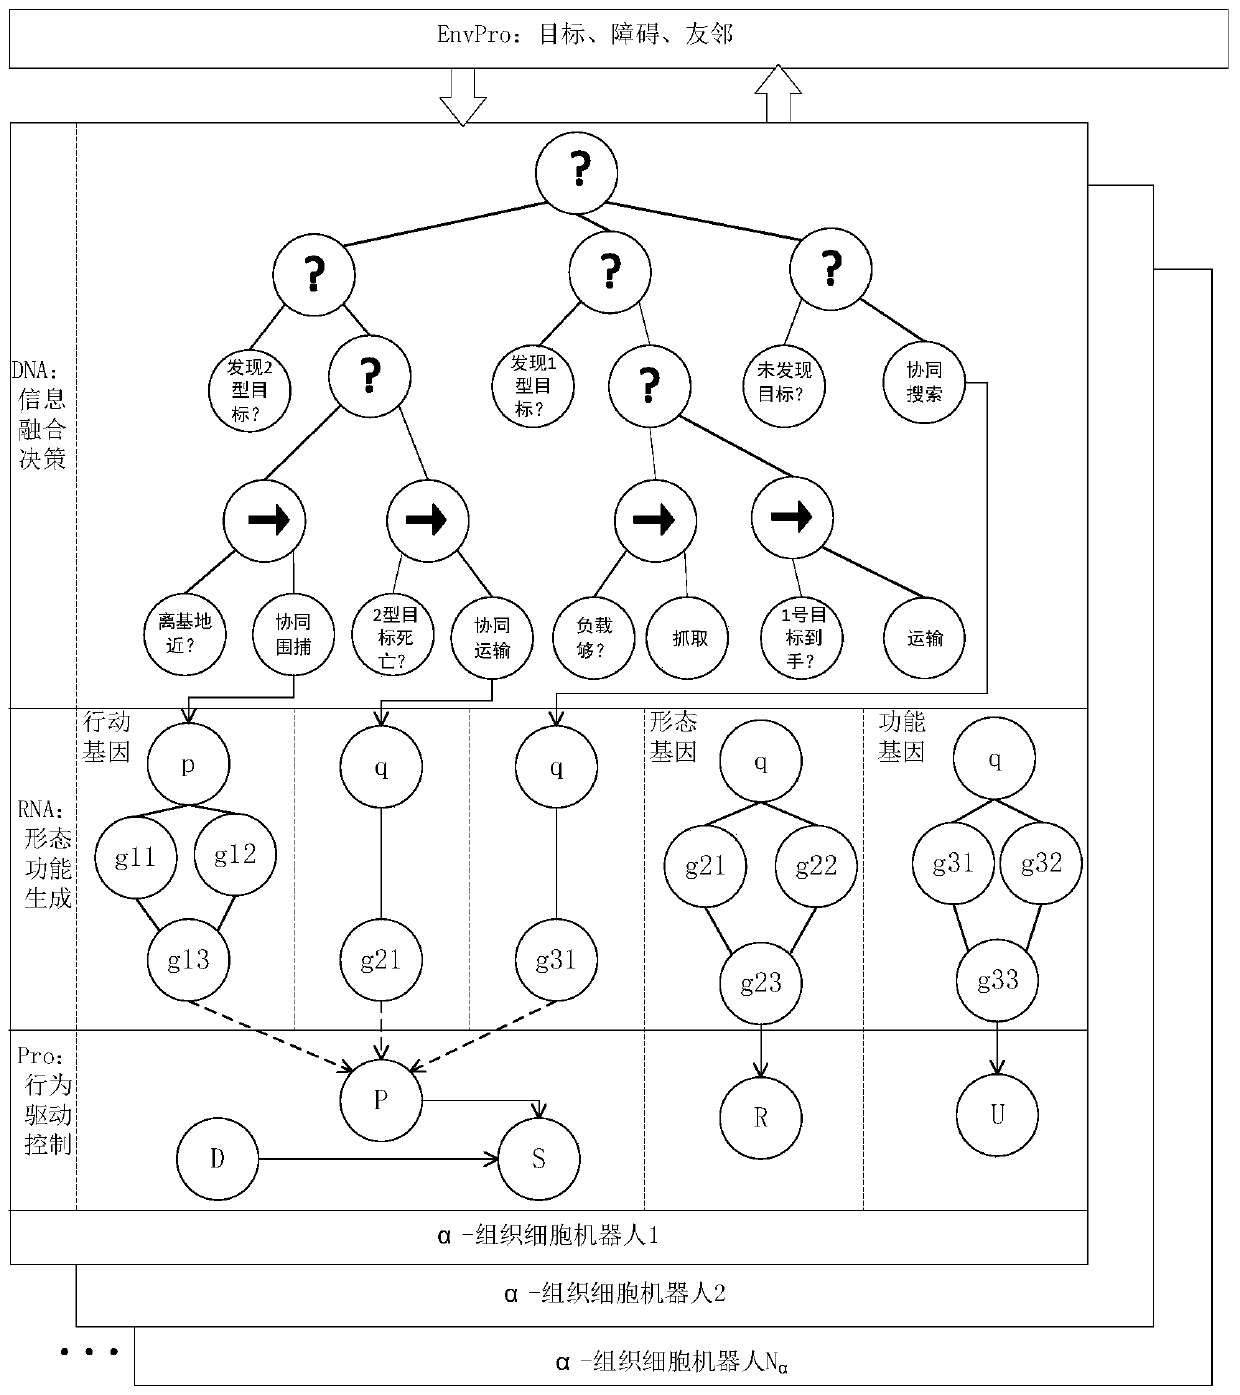 Swarm robot mode generation and conversion method of multistage variable gene regulation and control network